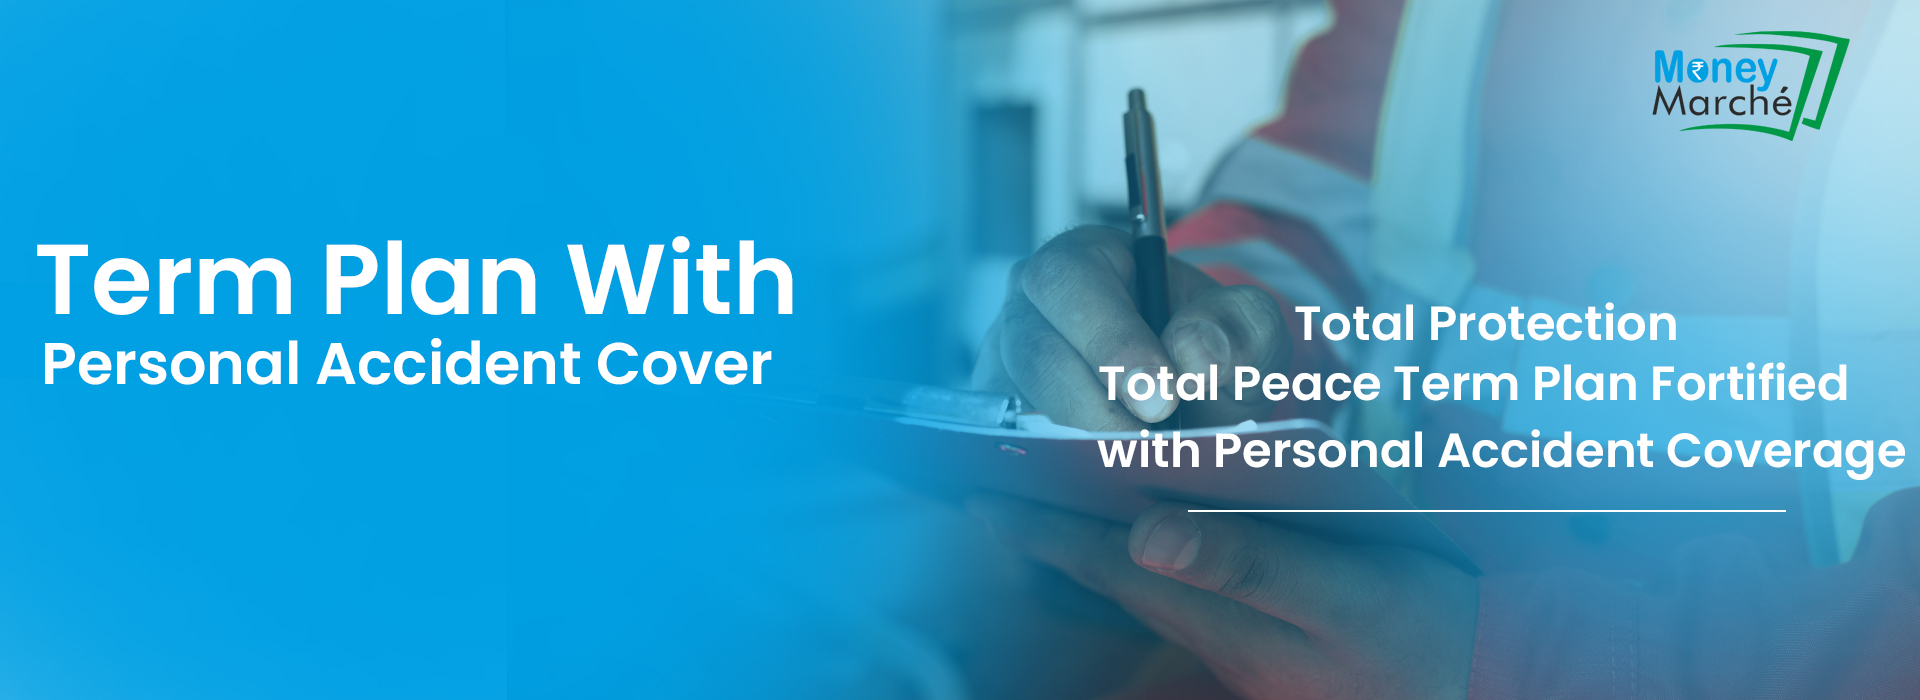 Term Plan With Personal Accident Cover